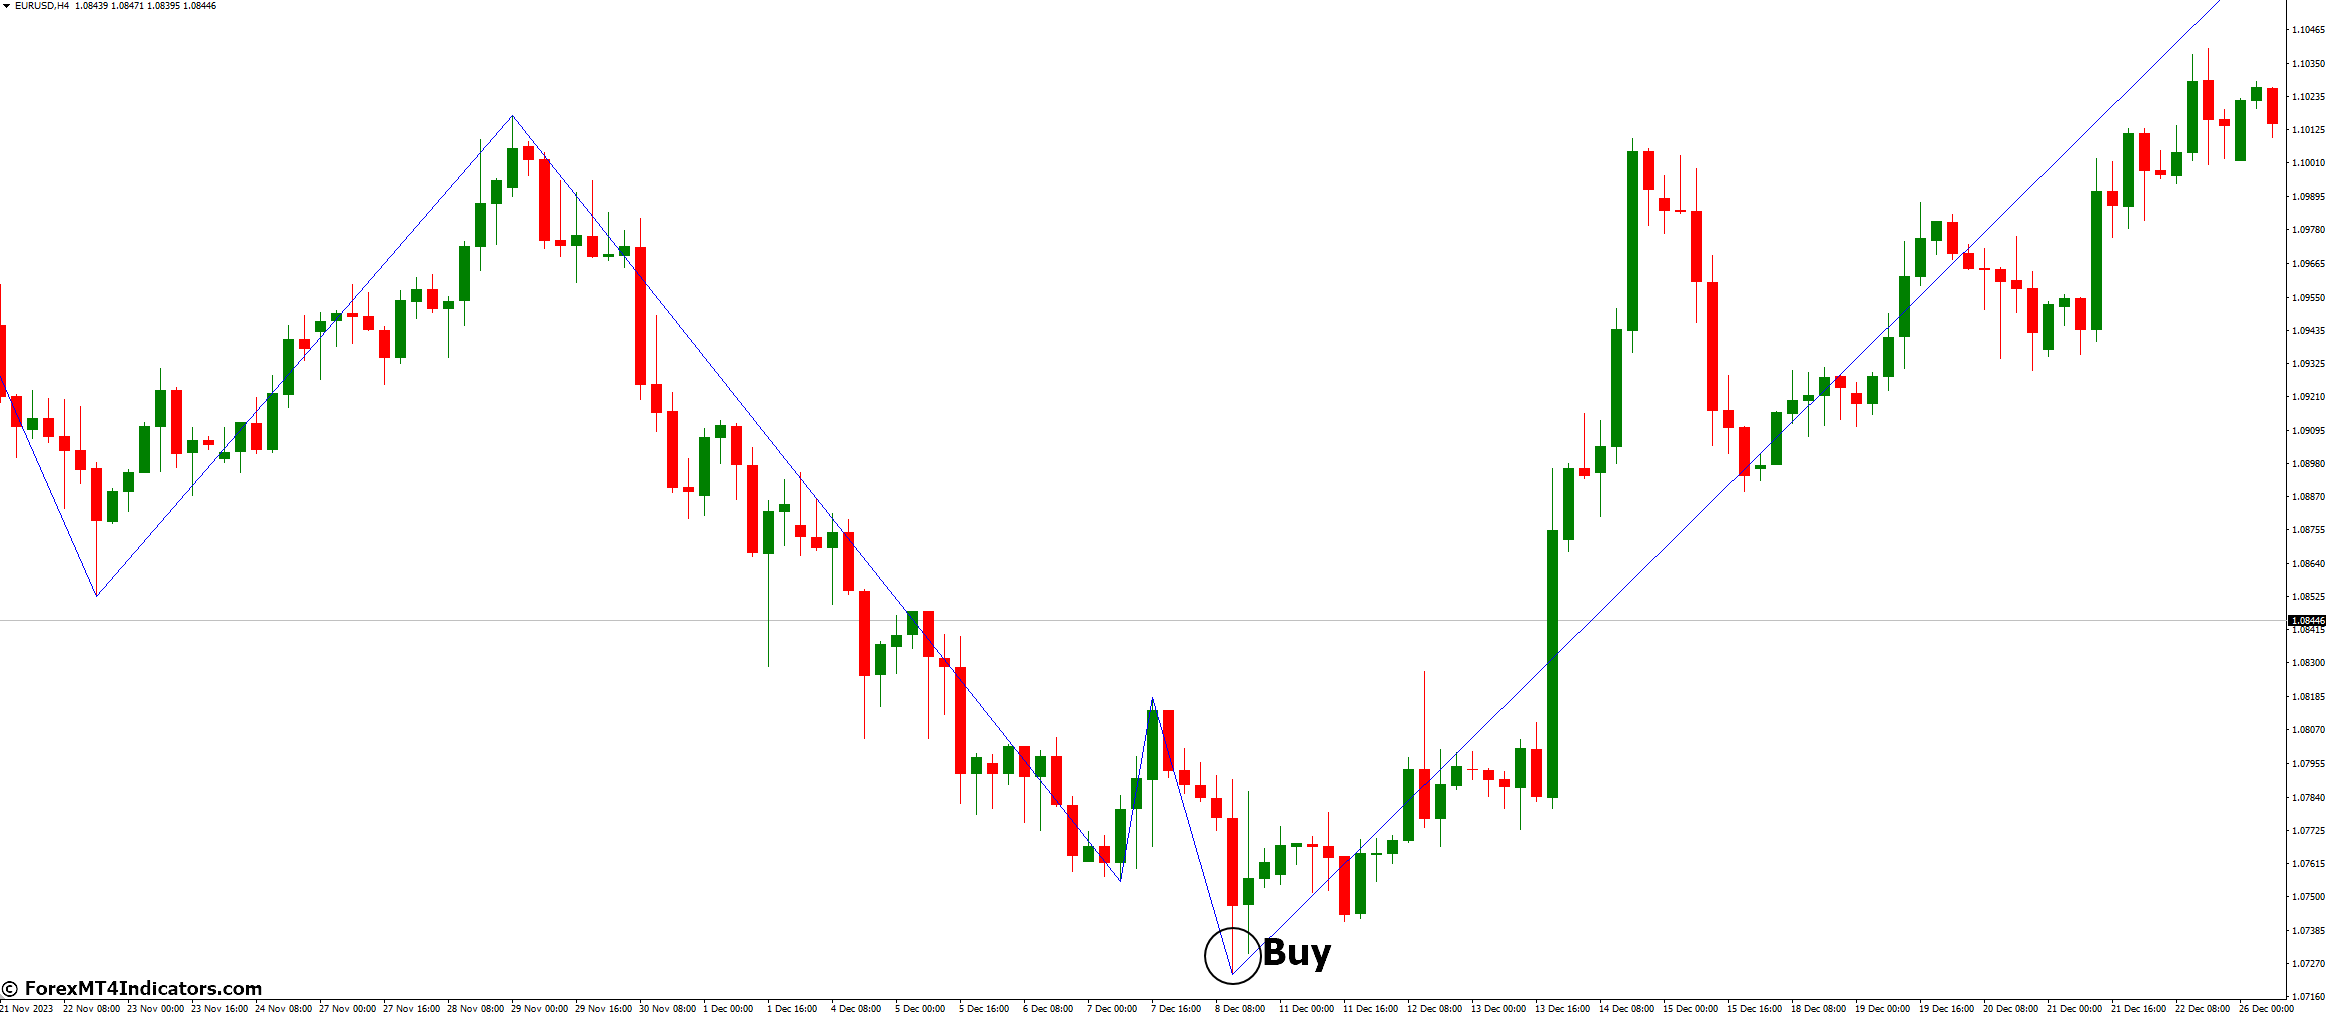 How to Trade with Zigzag 2 R Indicator - Buy Entry